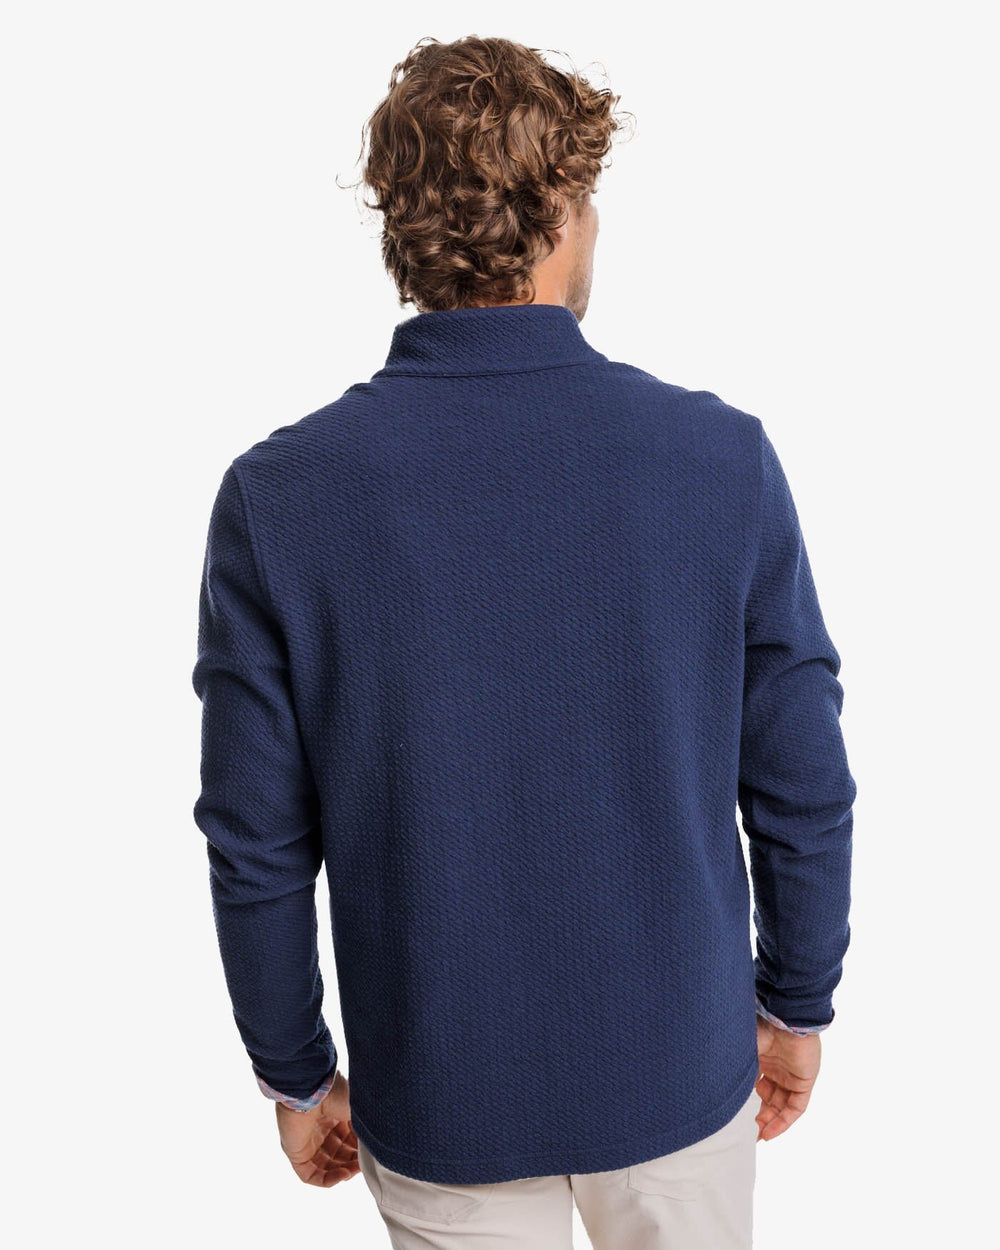 The back view of the Southern Tide Heather Outbound Quarter Zip by Southern Tide - Heather True Navy